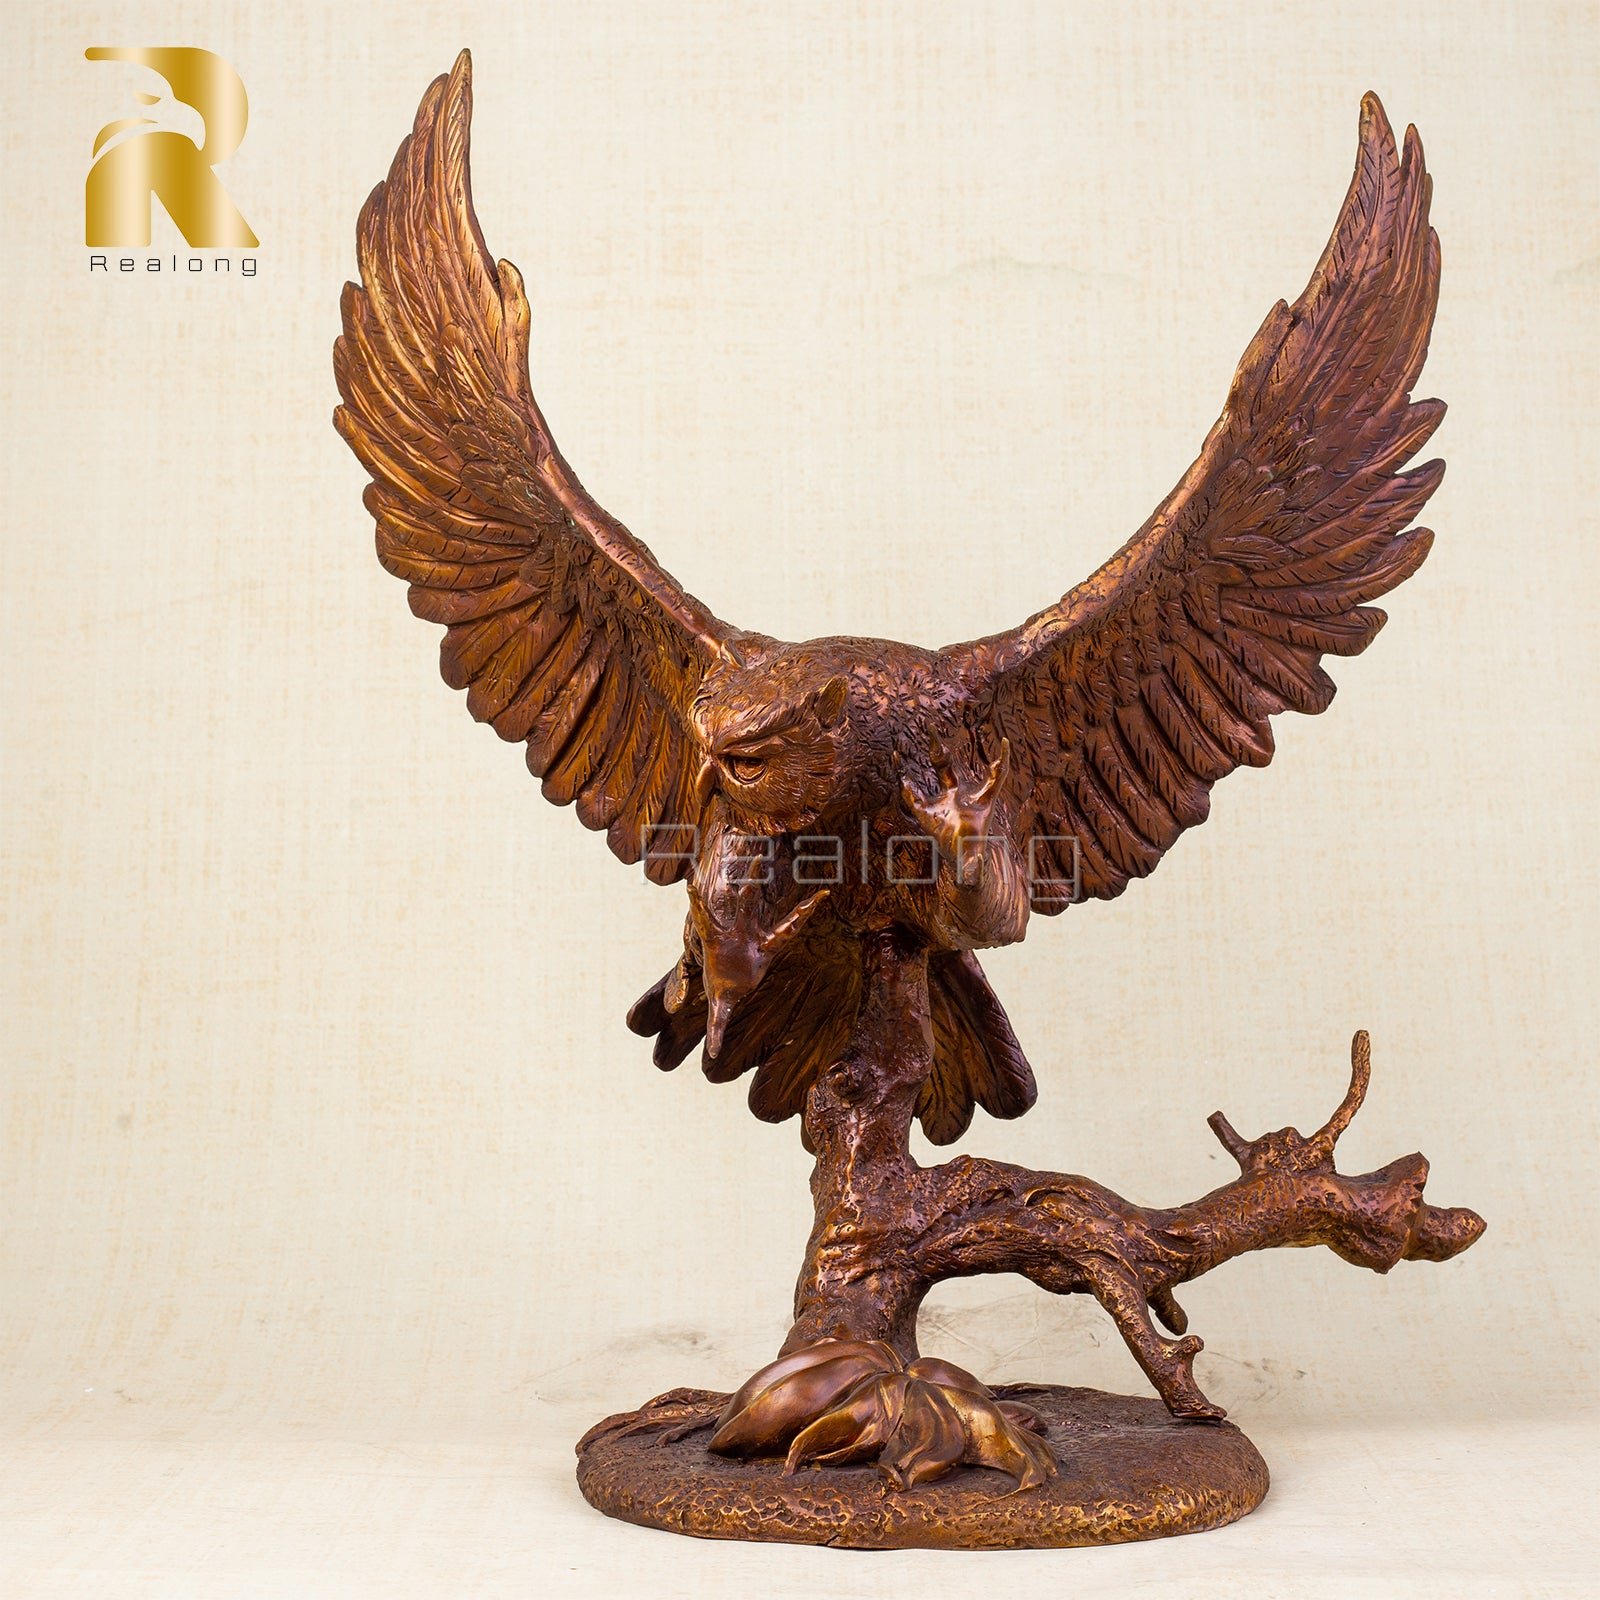 Owl Flying Over Branches Statue Pure Bronze Casting Bronze Animal Sculpture for Home Office Decor TD12-1805